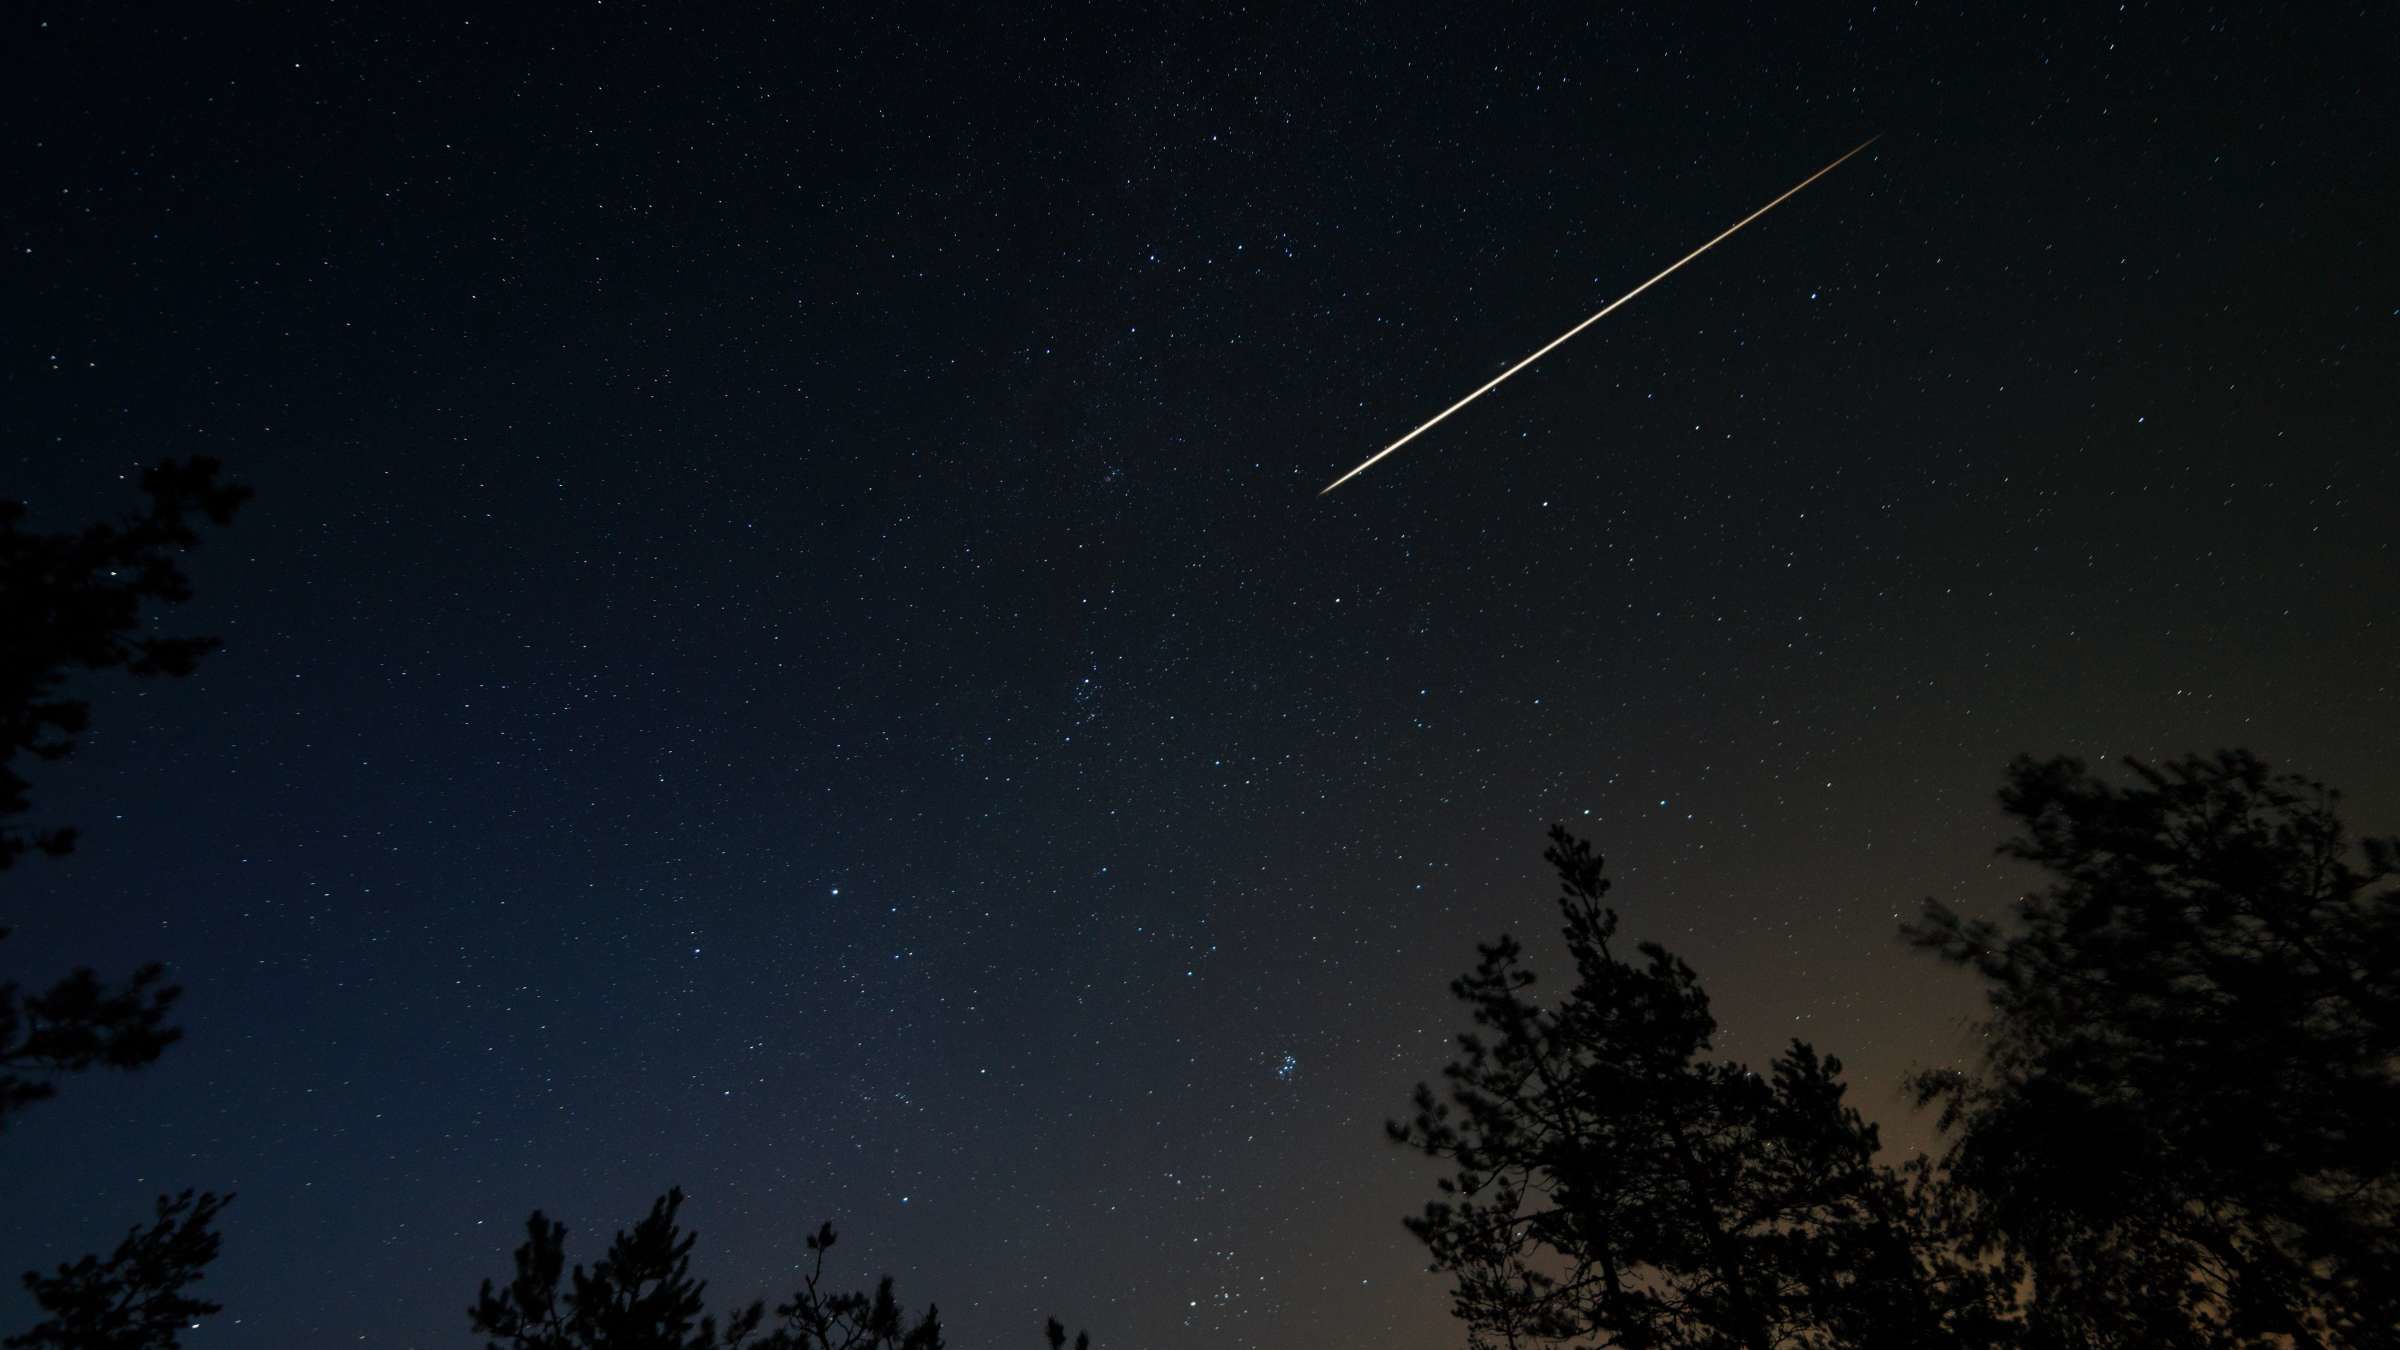 Draconids meteor shower peaks tonight - dont miss the 